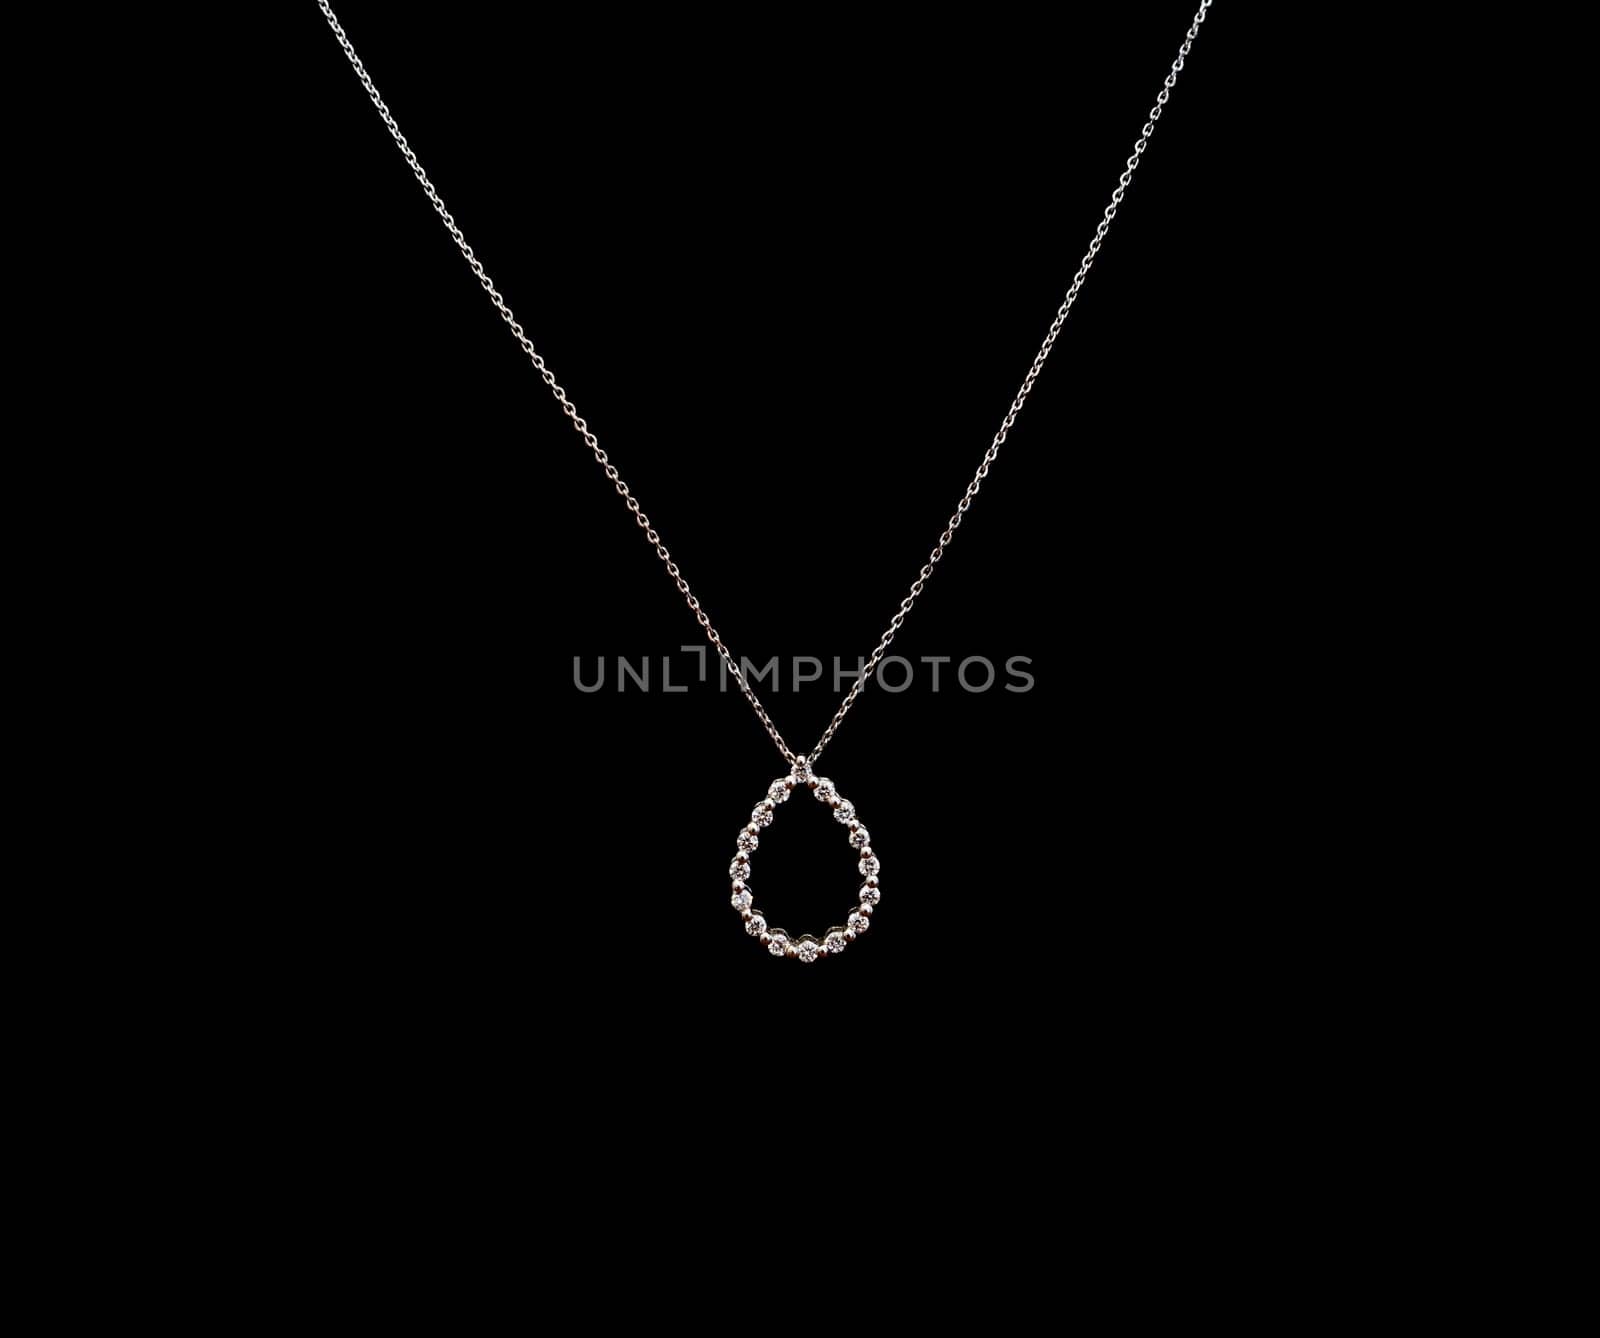 Luxury expensive white gold necklace with diamonds by paulvinten